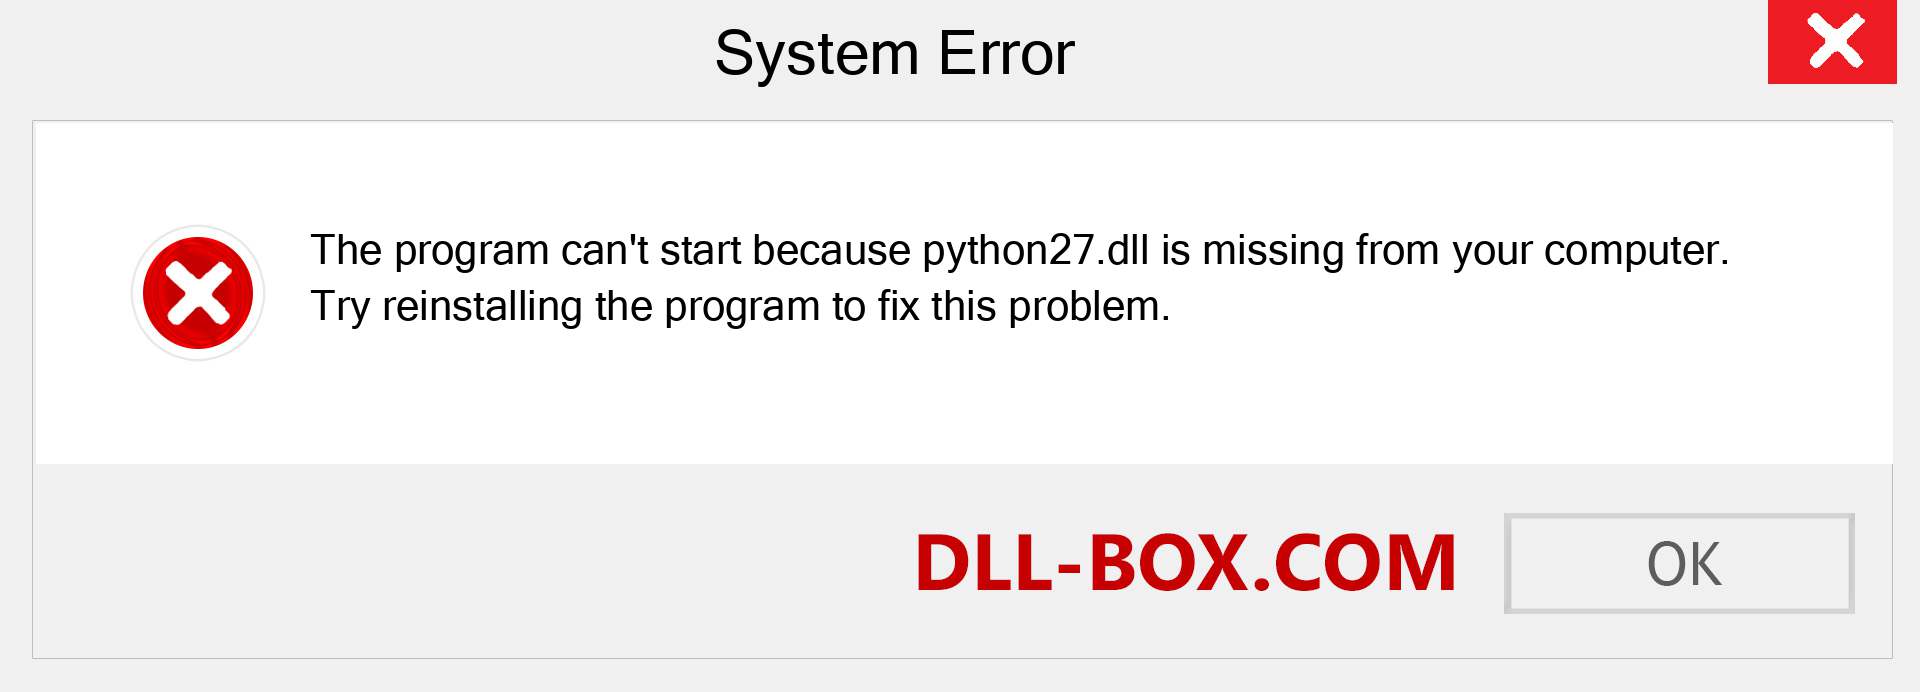  python27.dll file is missing?. Download for Windows 7, 8, 10 - Fix  python27 dll Missing Error on Windows, photos, images